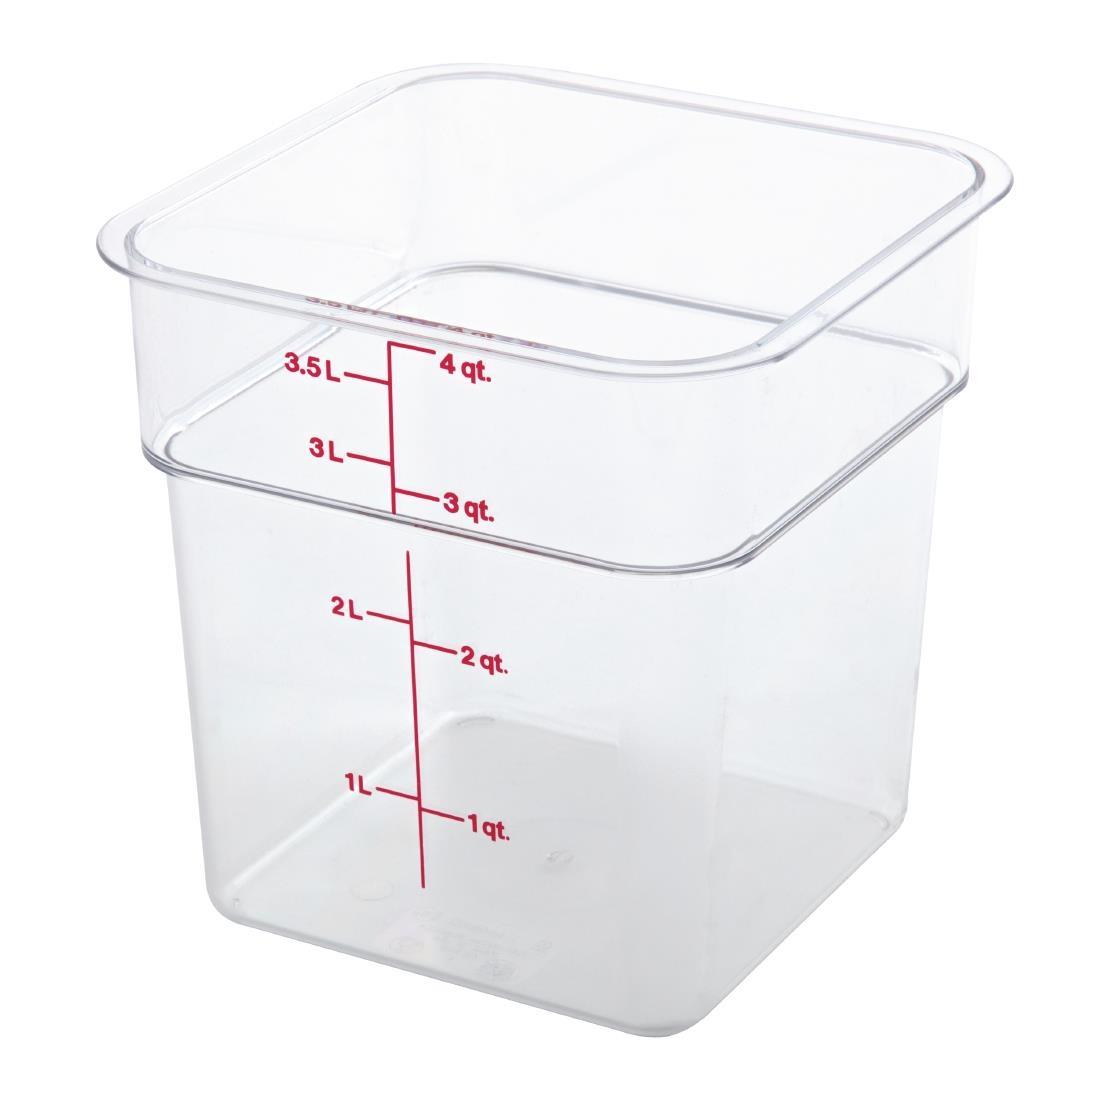 Cambro Square Polycarbonate Food Storage Container 3.8 Ltr - DT196  - 3